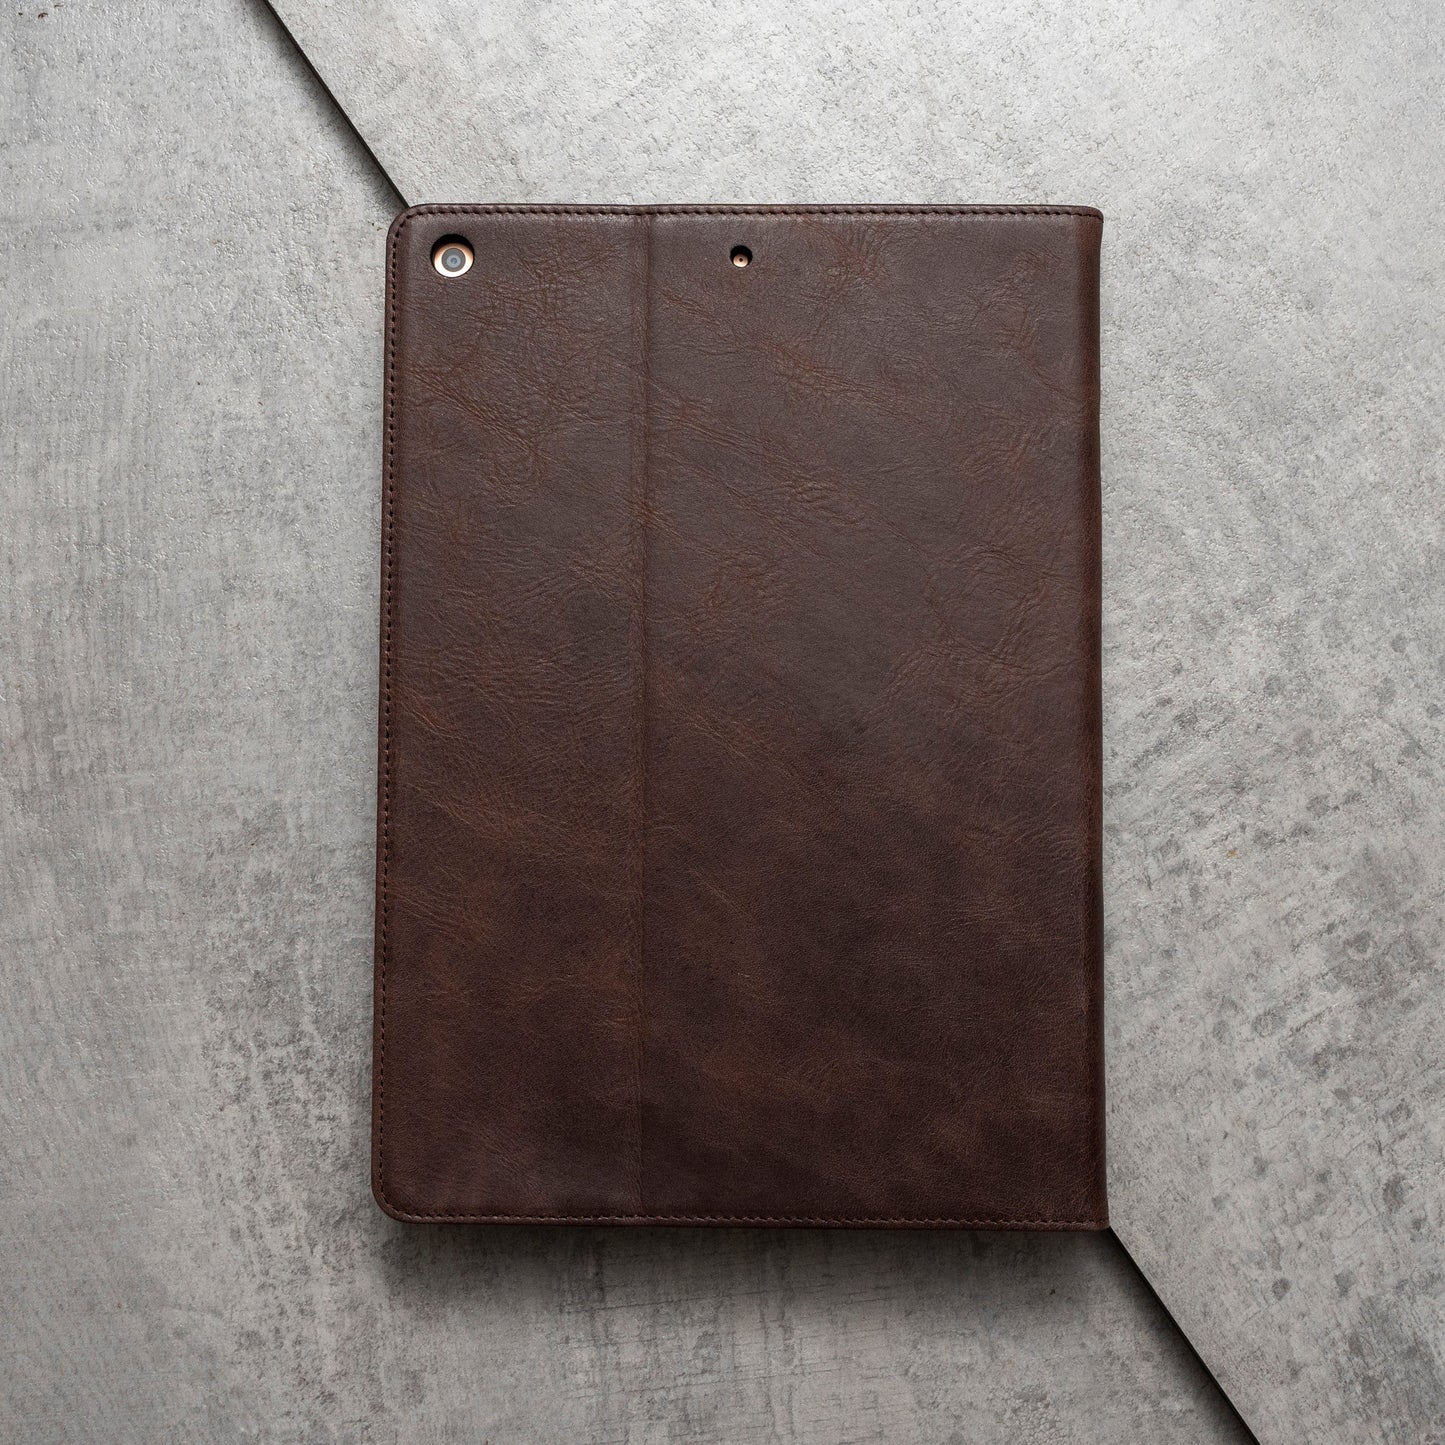 iPad Mini 5 Leather Case. Premium Slim Genuine Leather Stand Case/Cover/Wallet (Chocolate Brown)